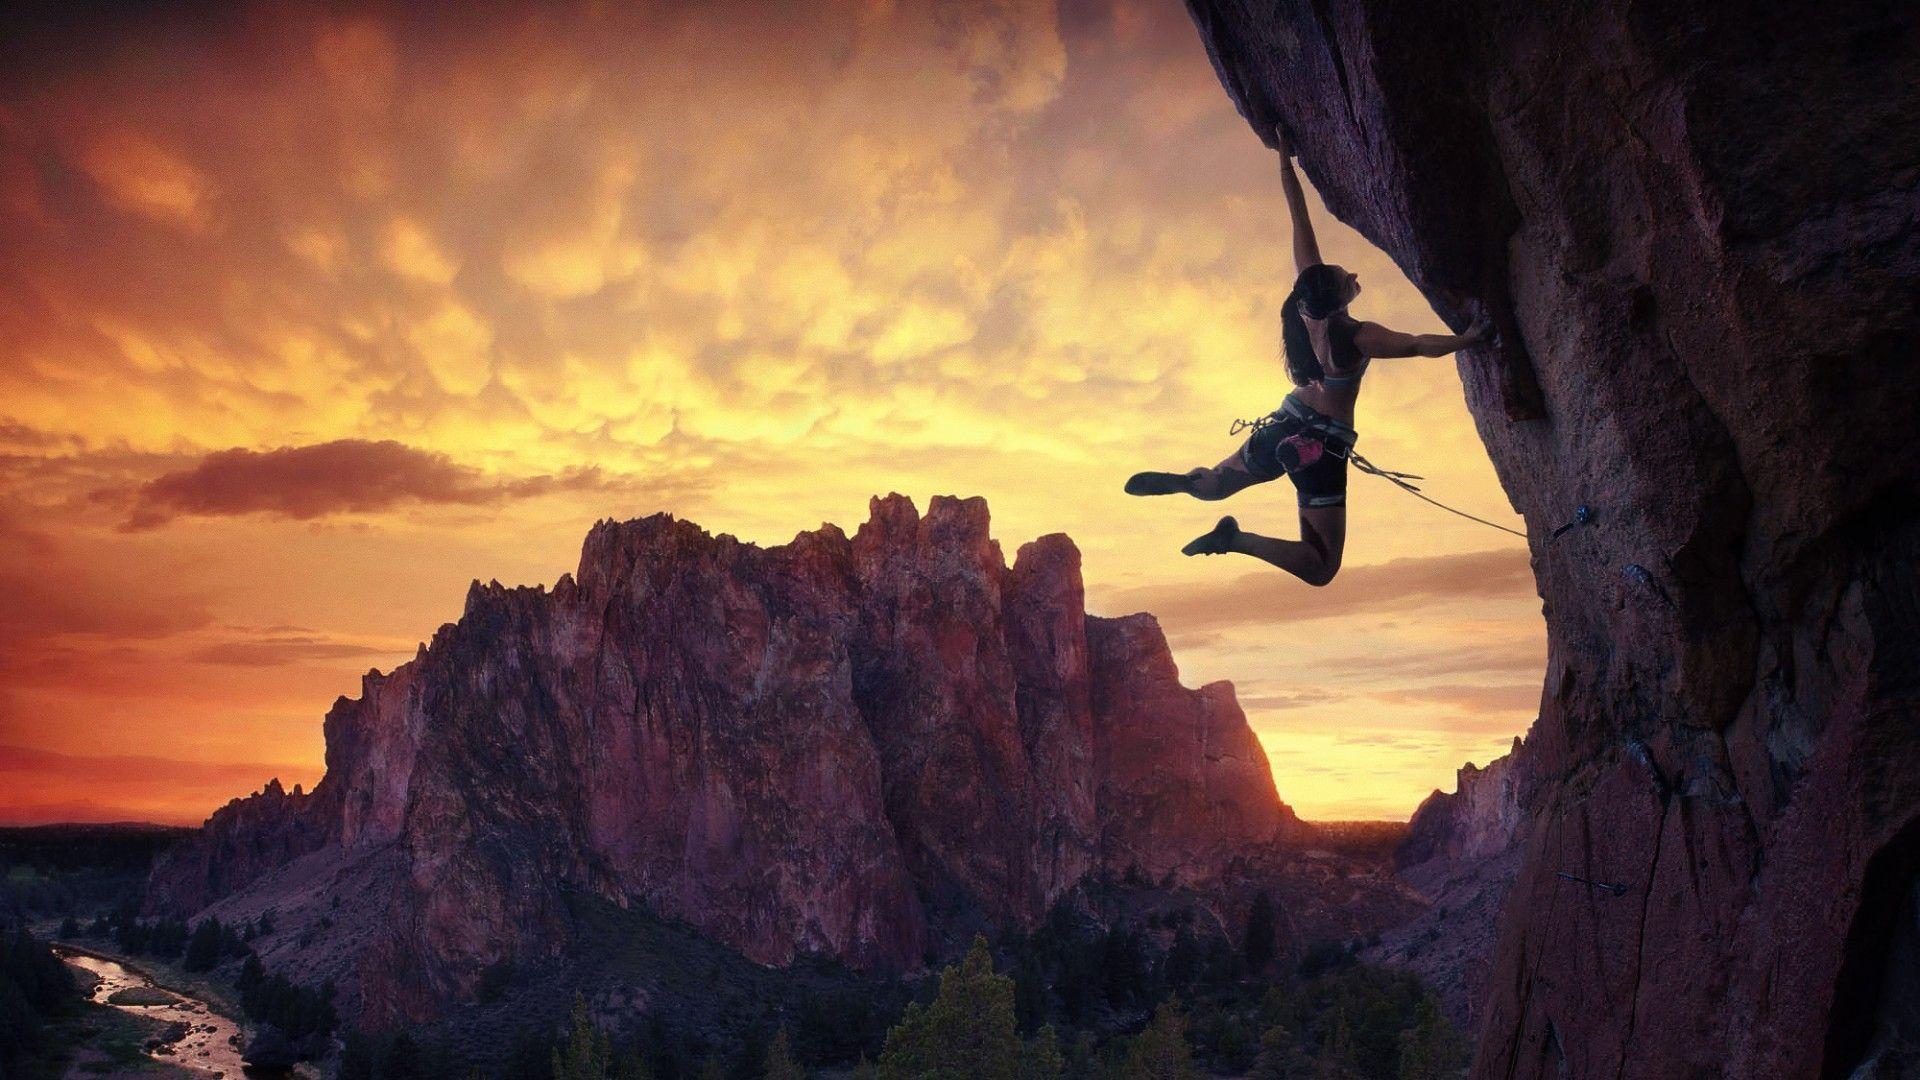 Climber with insurance wallpaper and image, picture